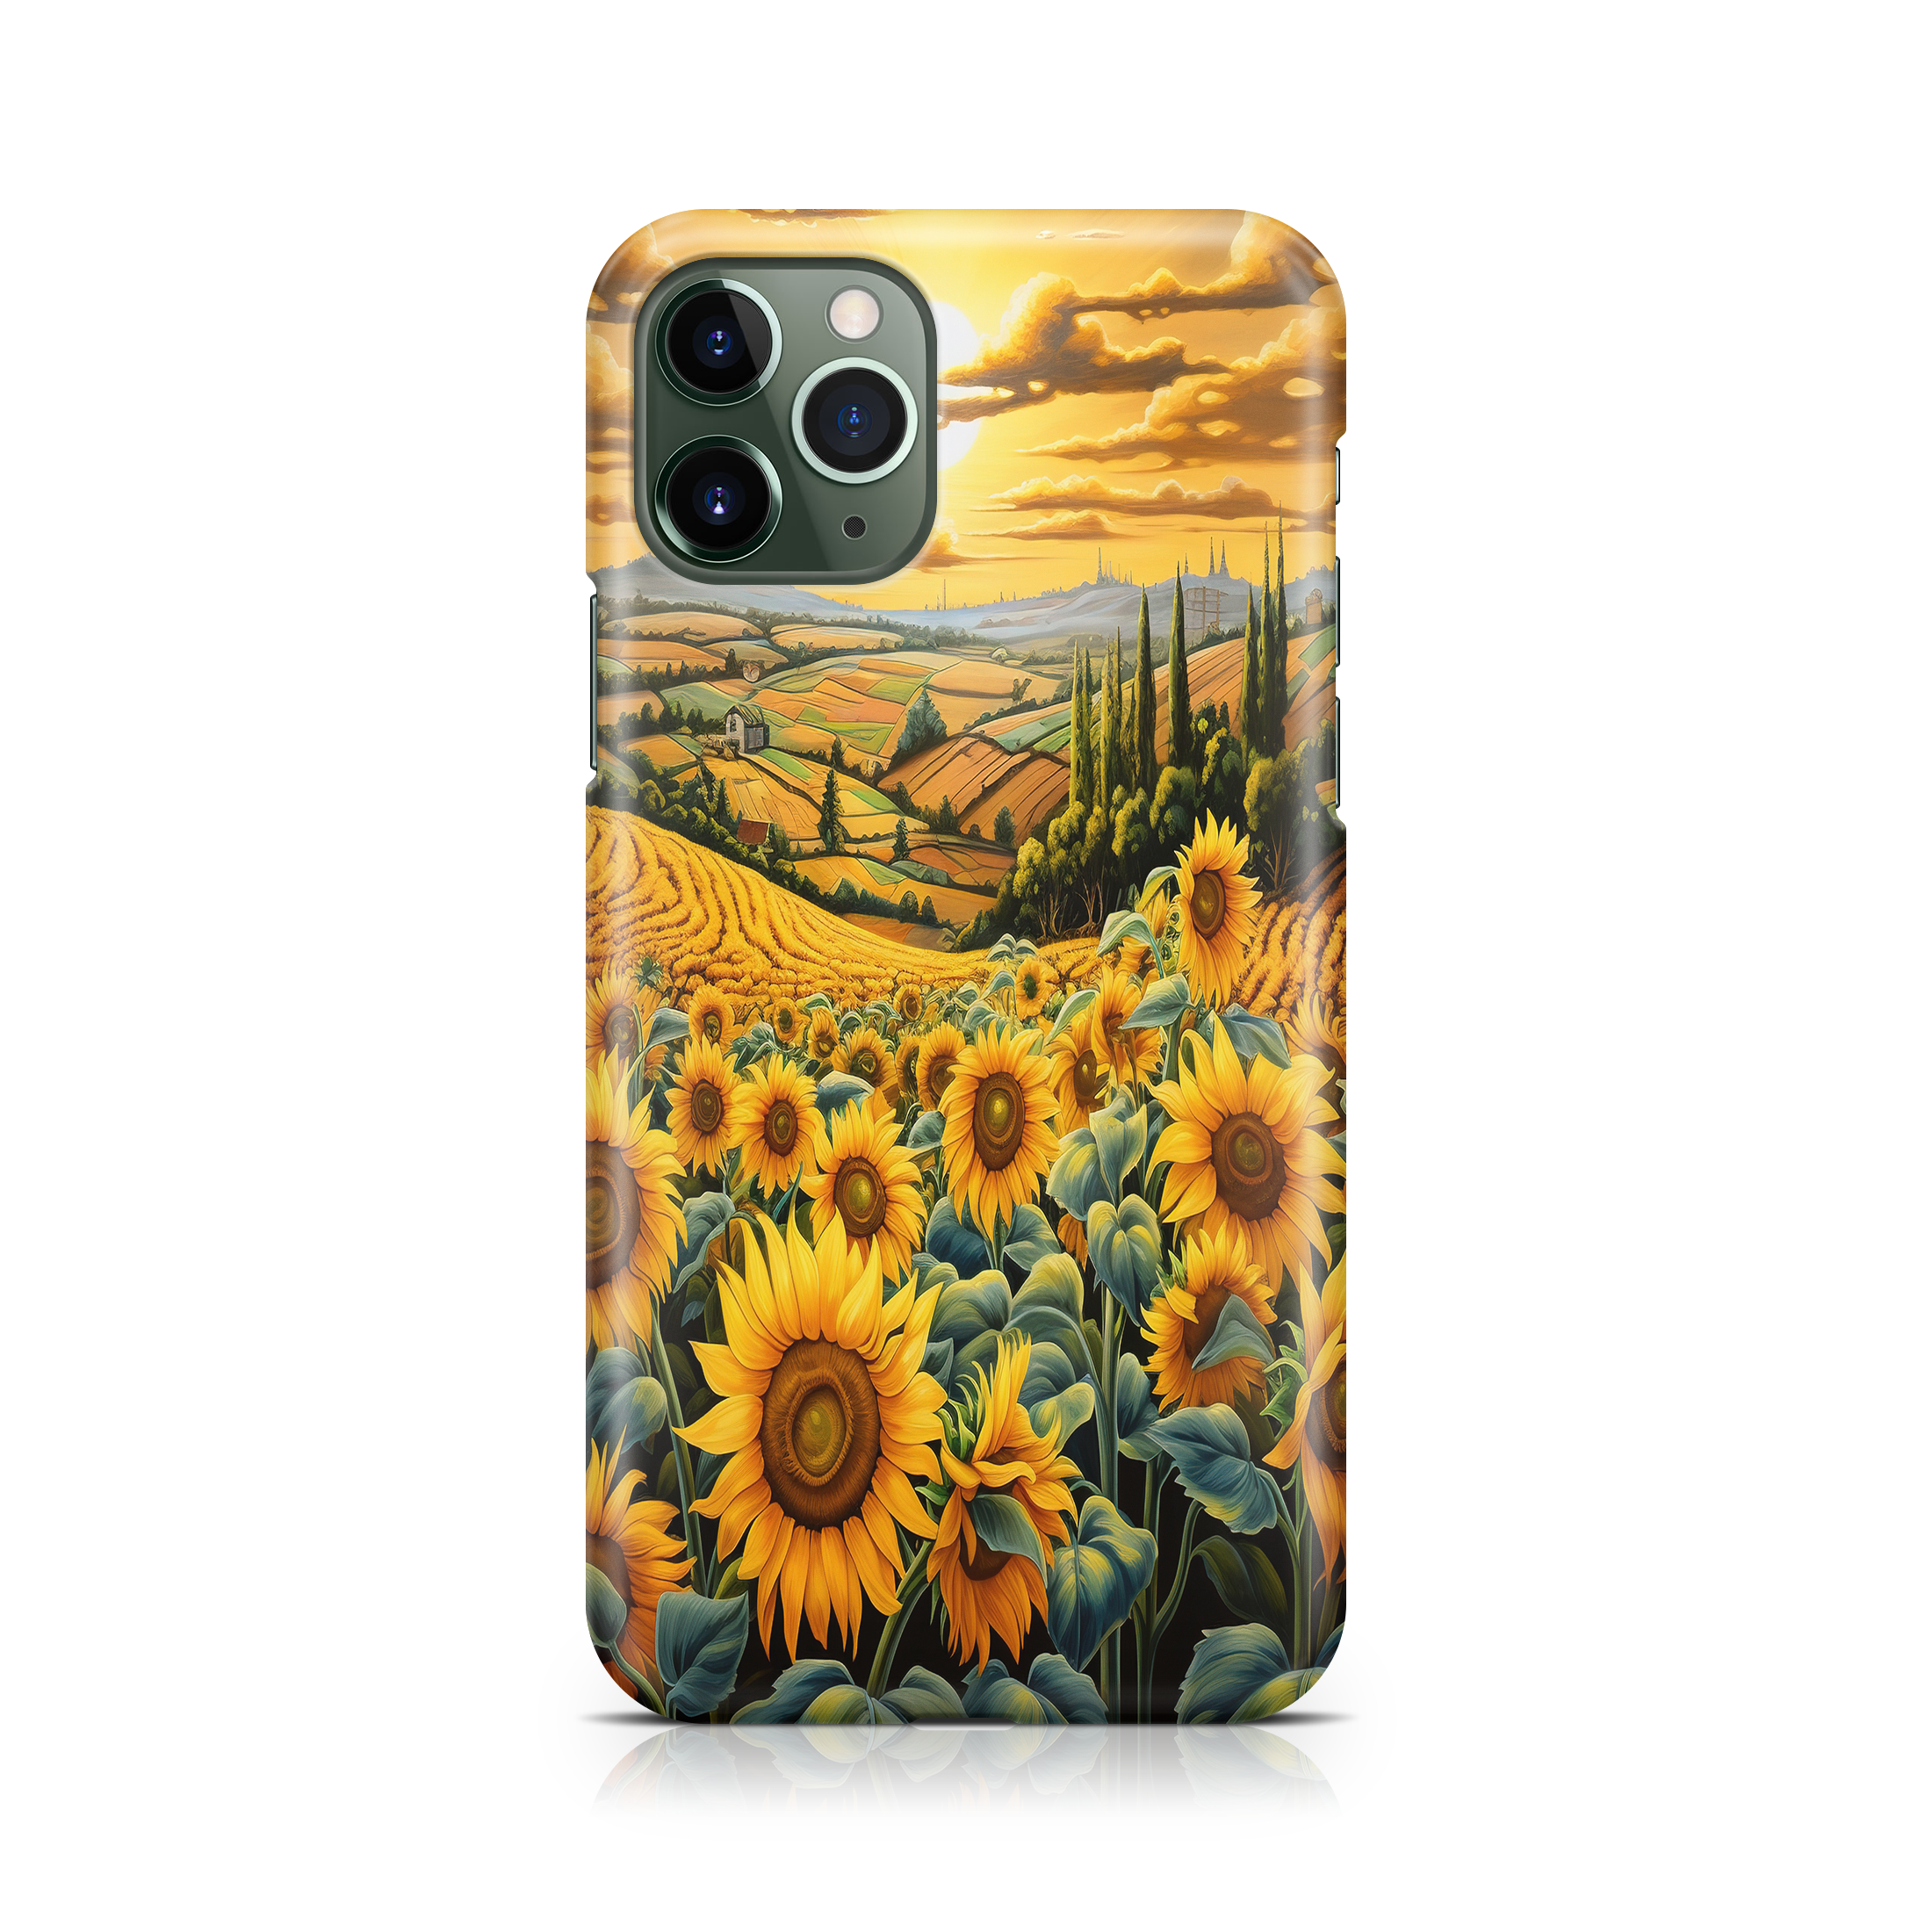 Sunflower Fields - iPhone phone case designs by CaseSwagger